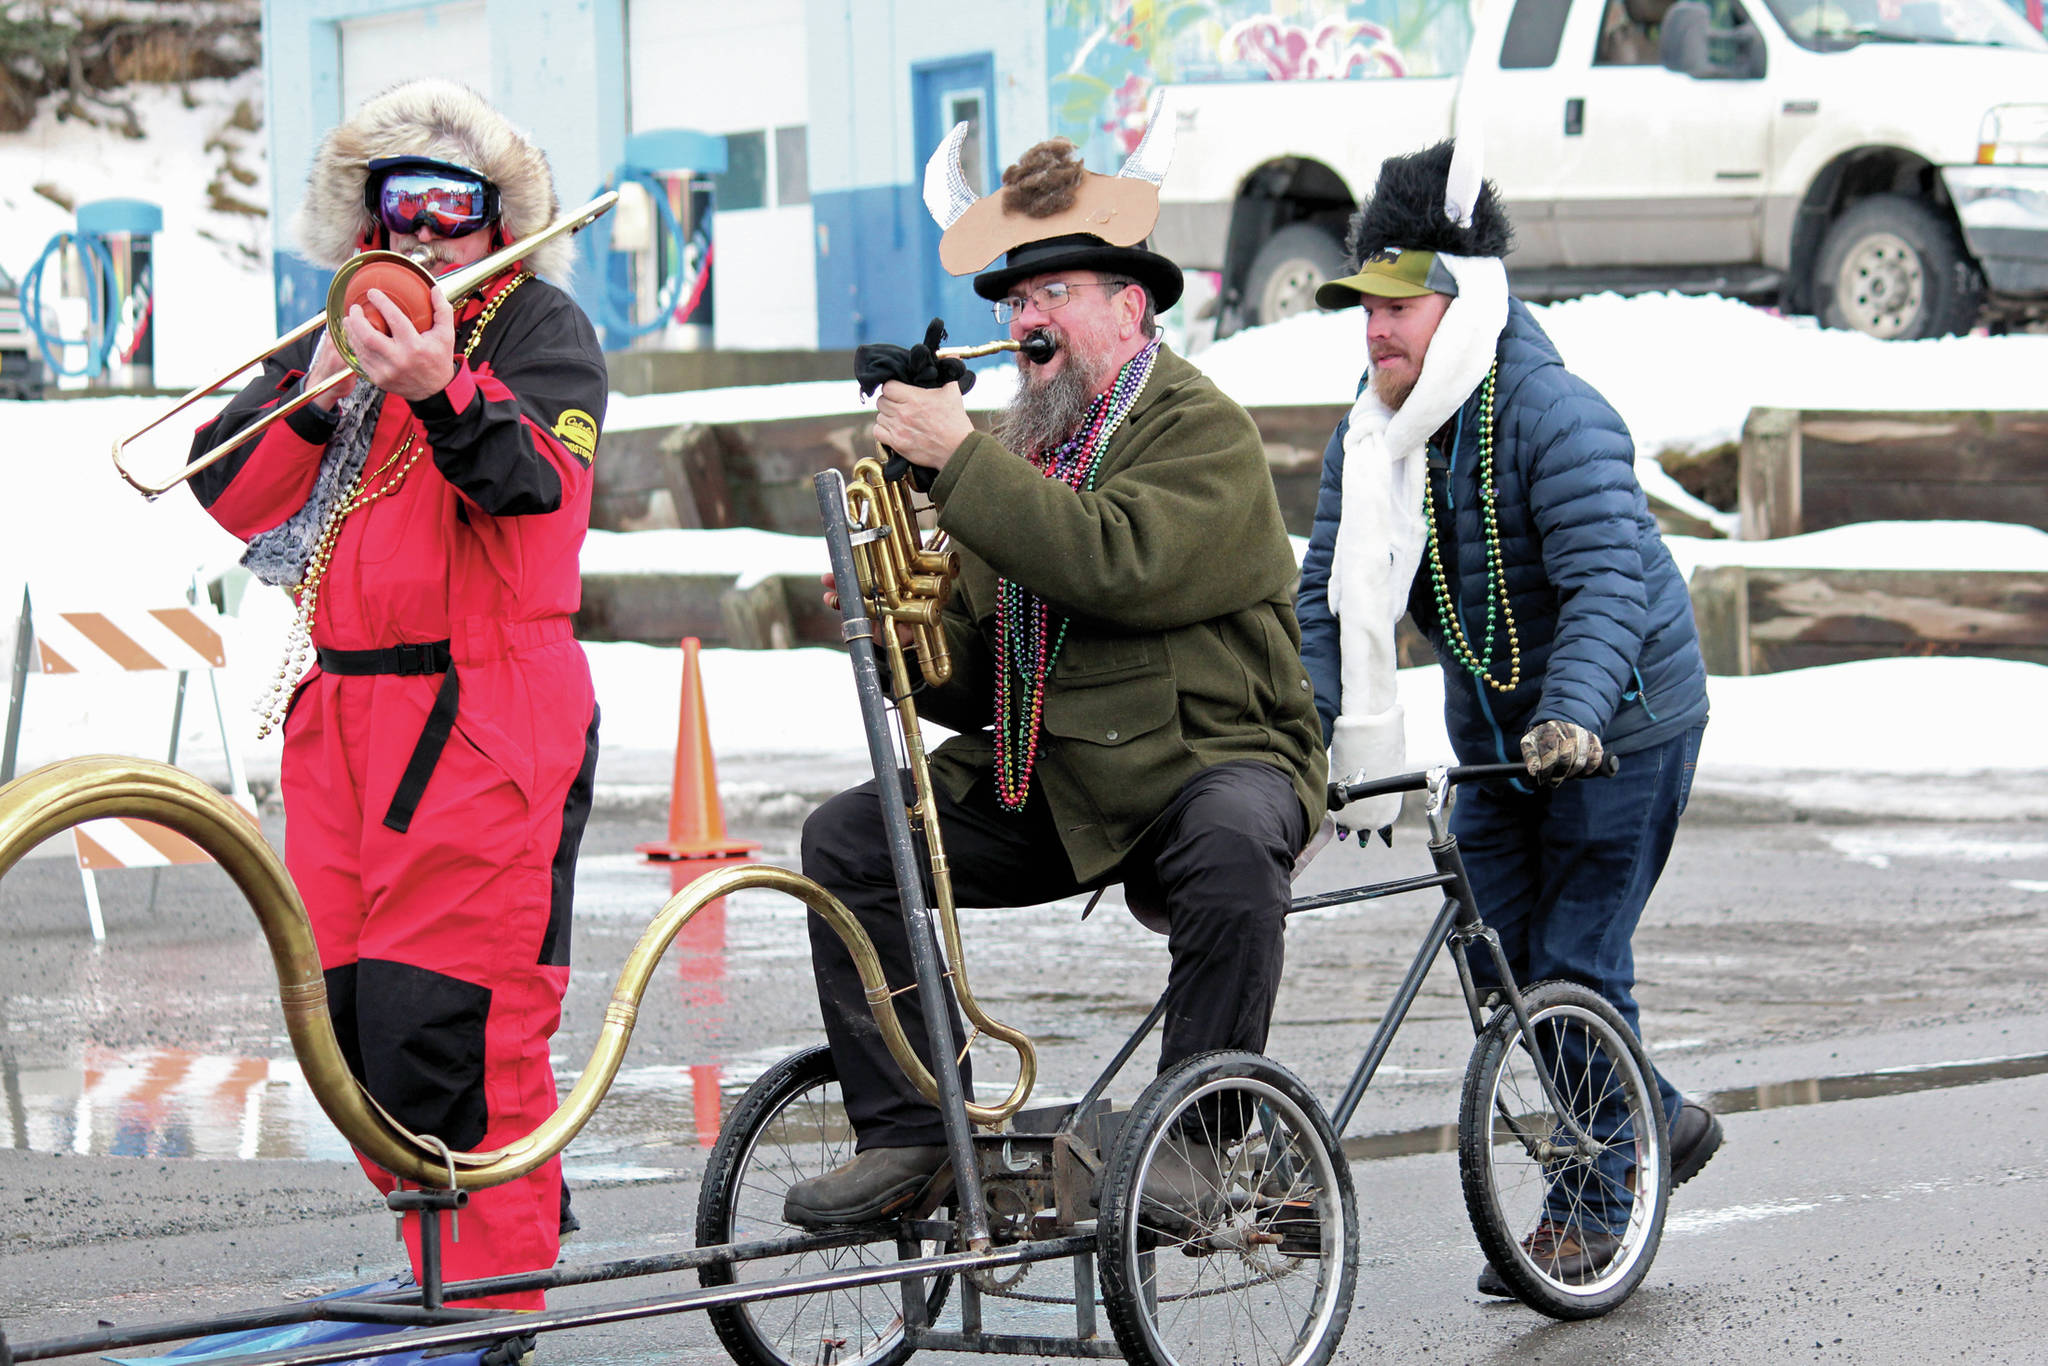 A parade participant plays a bike horn with the Krewe of Gambrinus float during this year’s Homer Winter Carnival Parade on Saturday, Feb. 8, 2020 in Homer, Alaska. (Photo by Megan Pacer/Homer News)